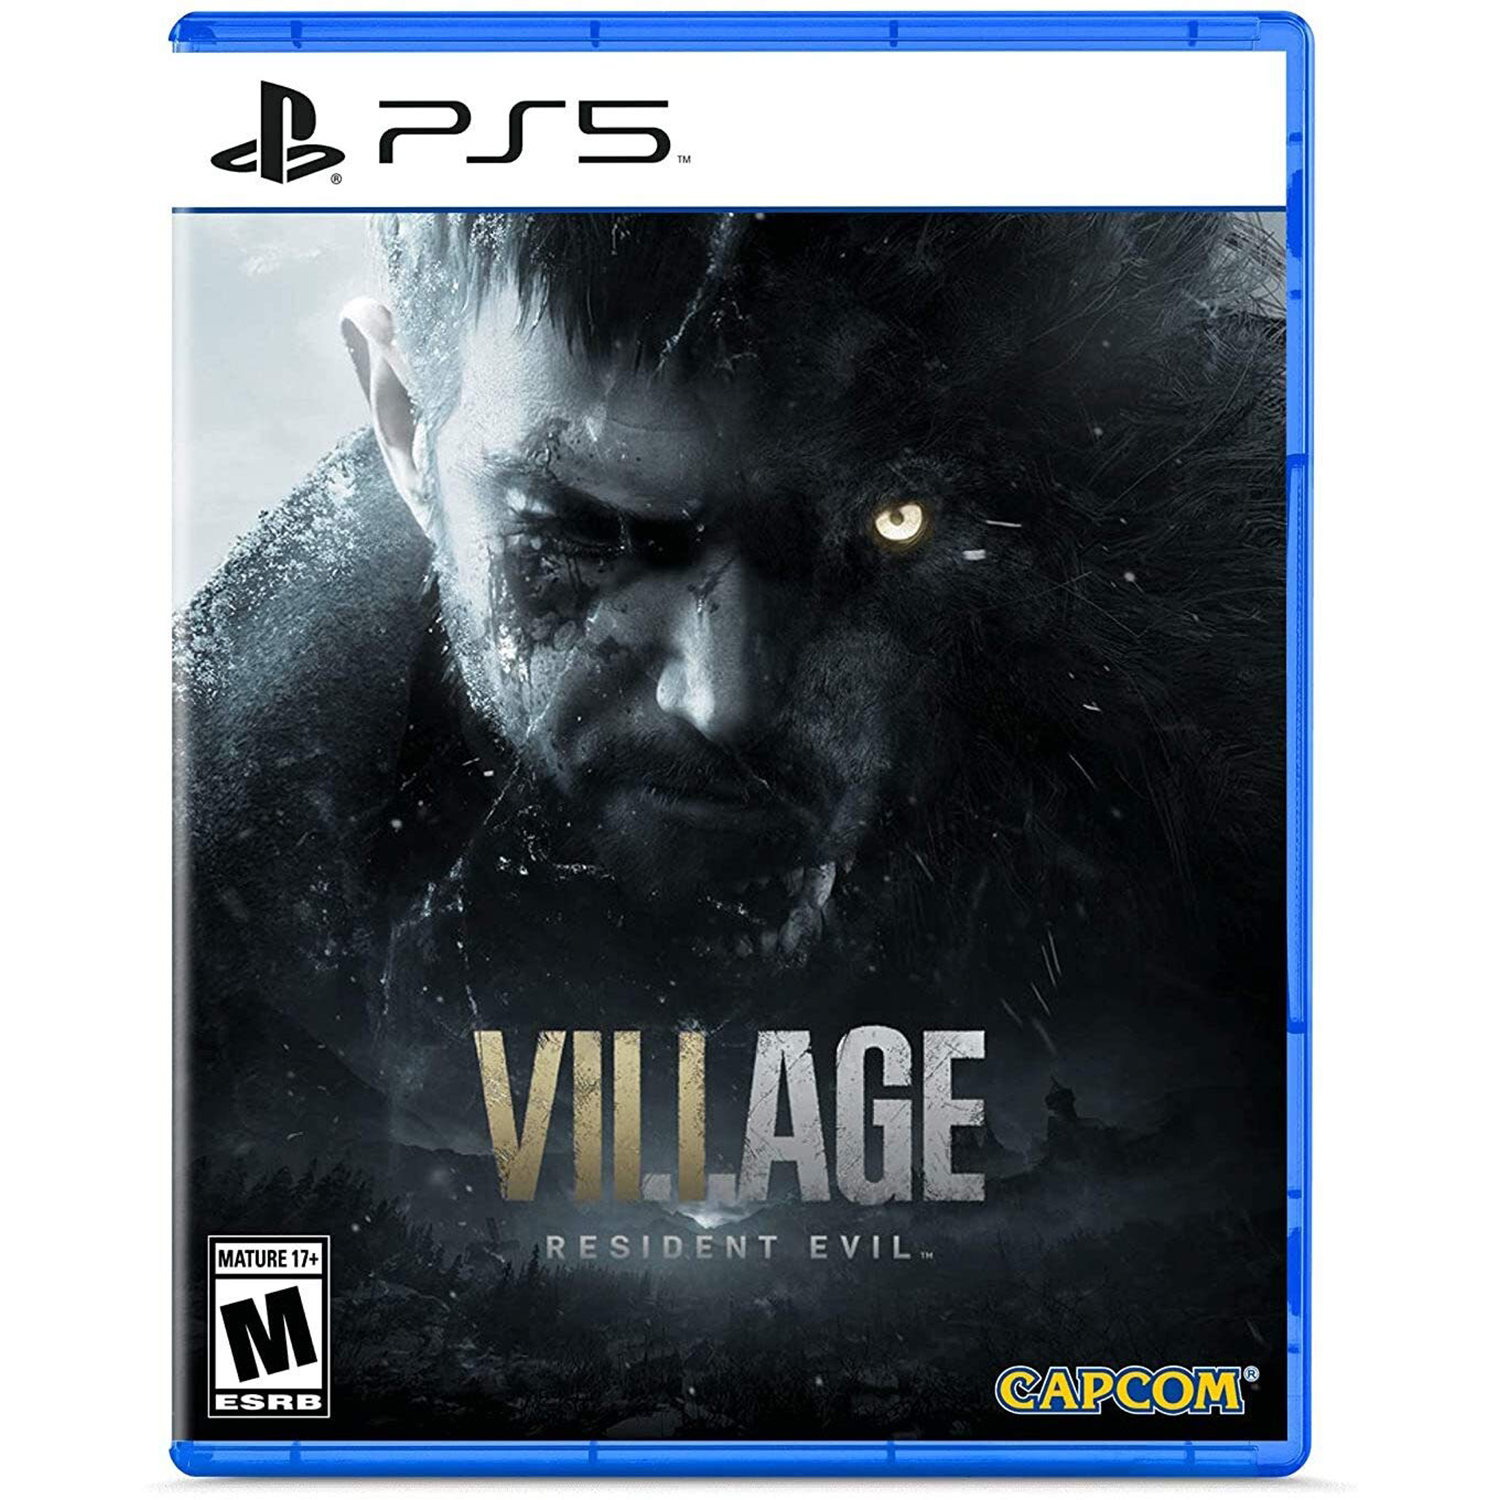 Resident Evil Village And FIFA 21 Next Level - Two Games For PS5 - $133.85